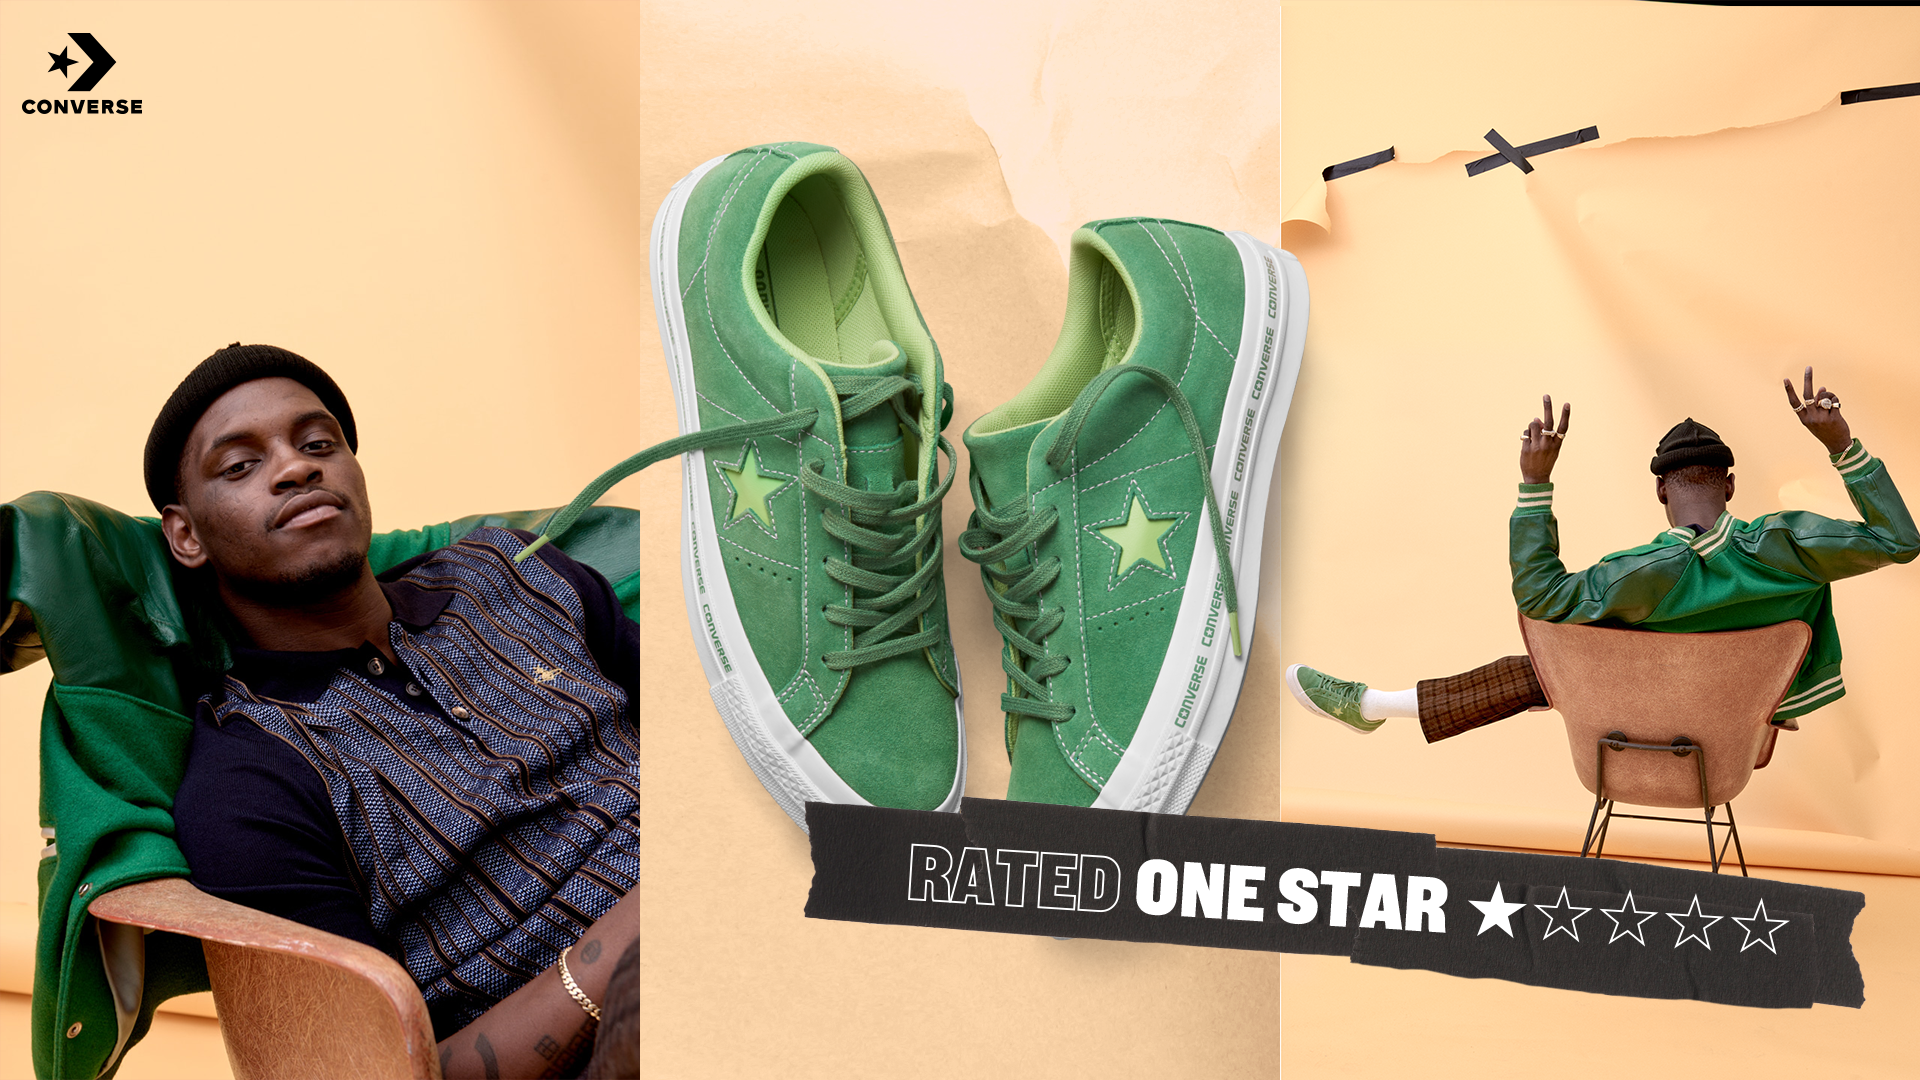 converse rated one